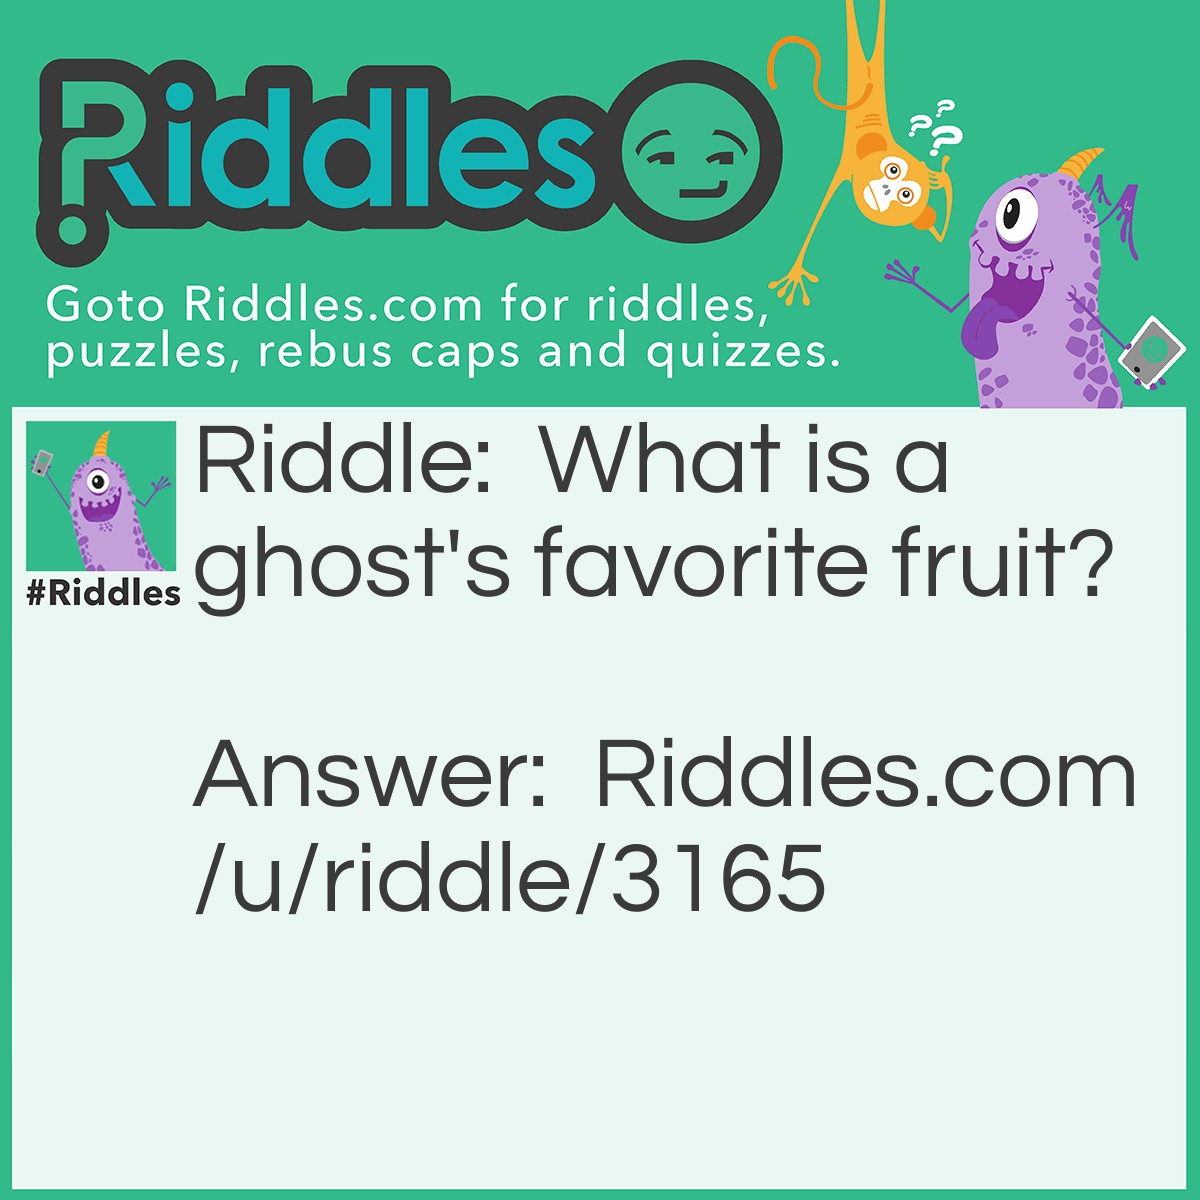 Riddle: What is a ghost's favorite fruit? Answer: BOO-BERRIES!